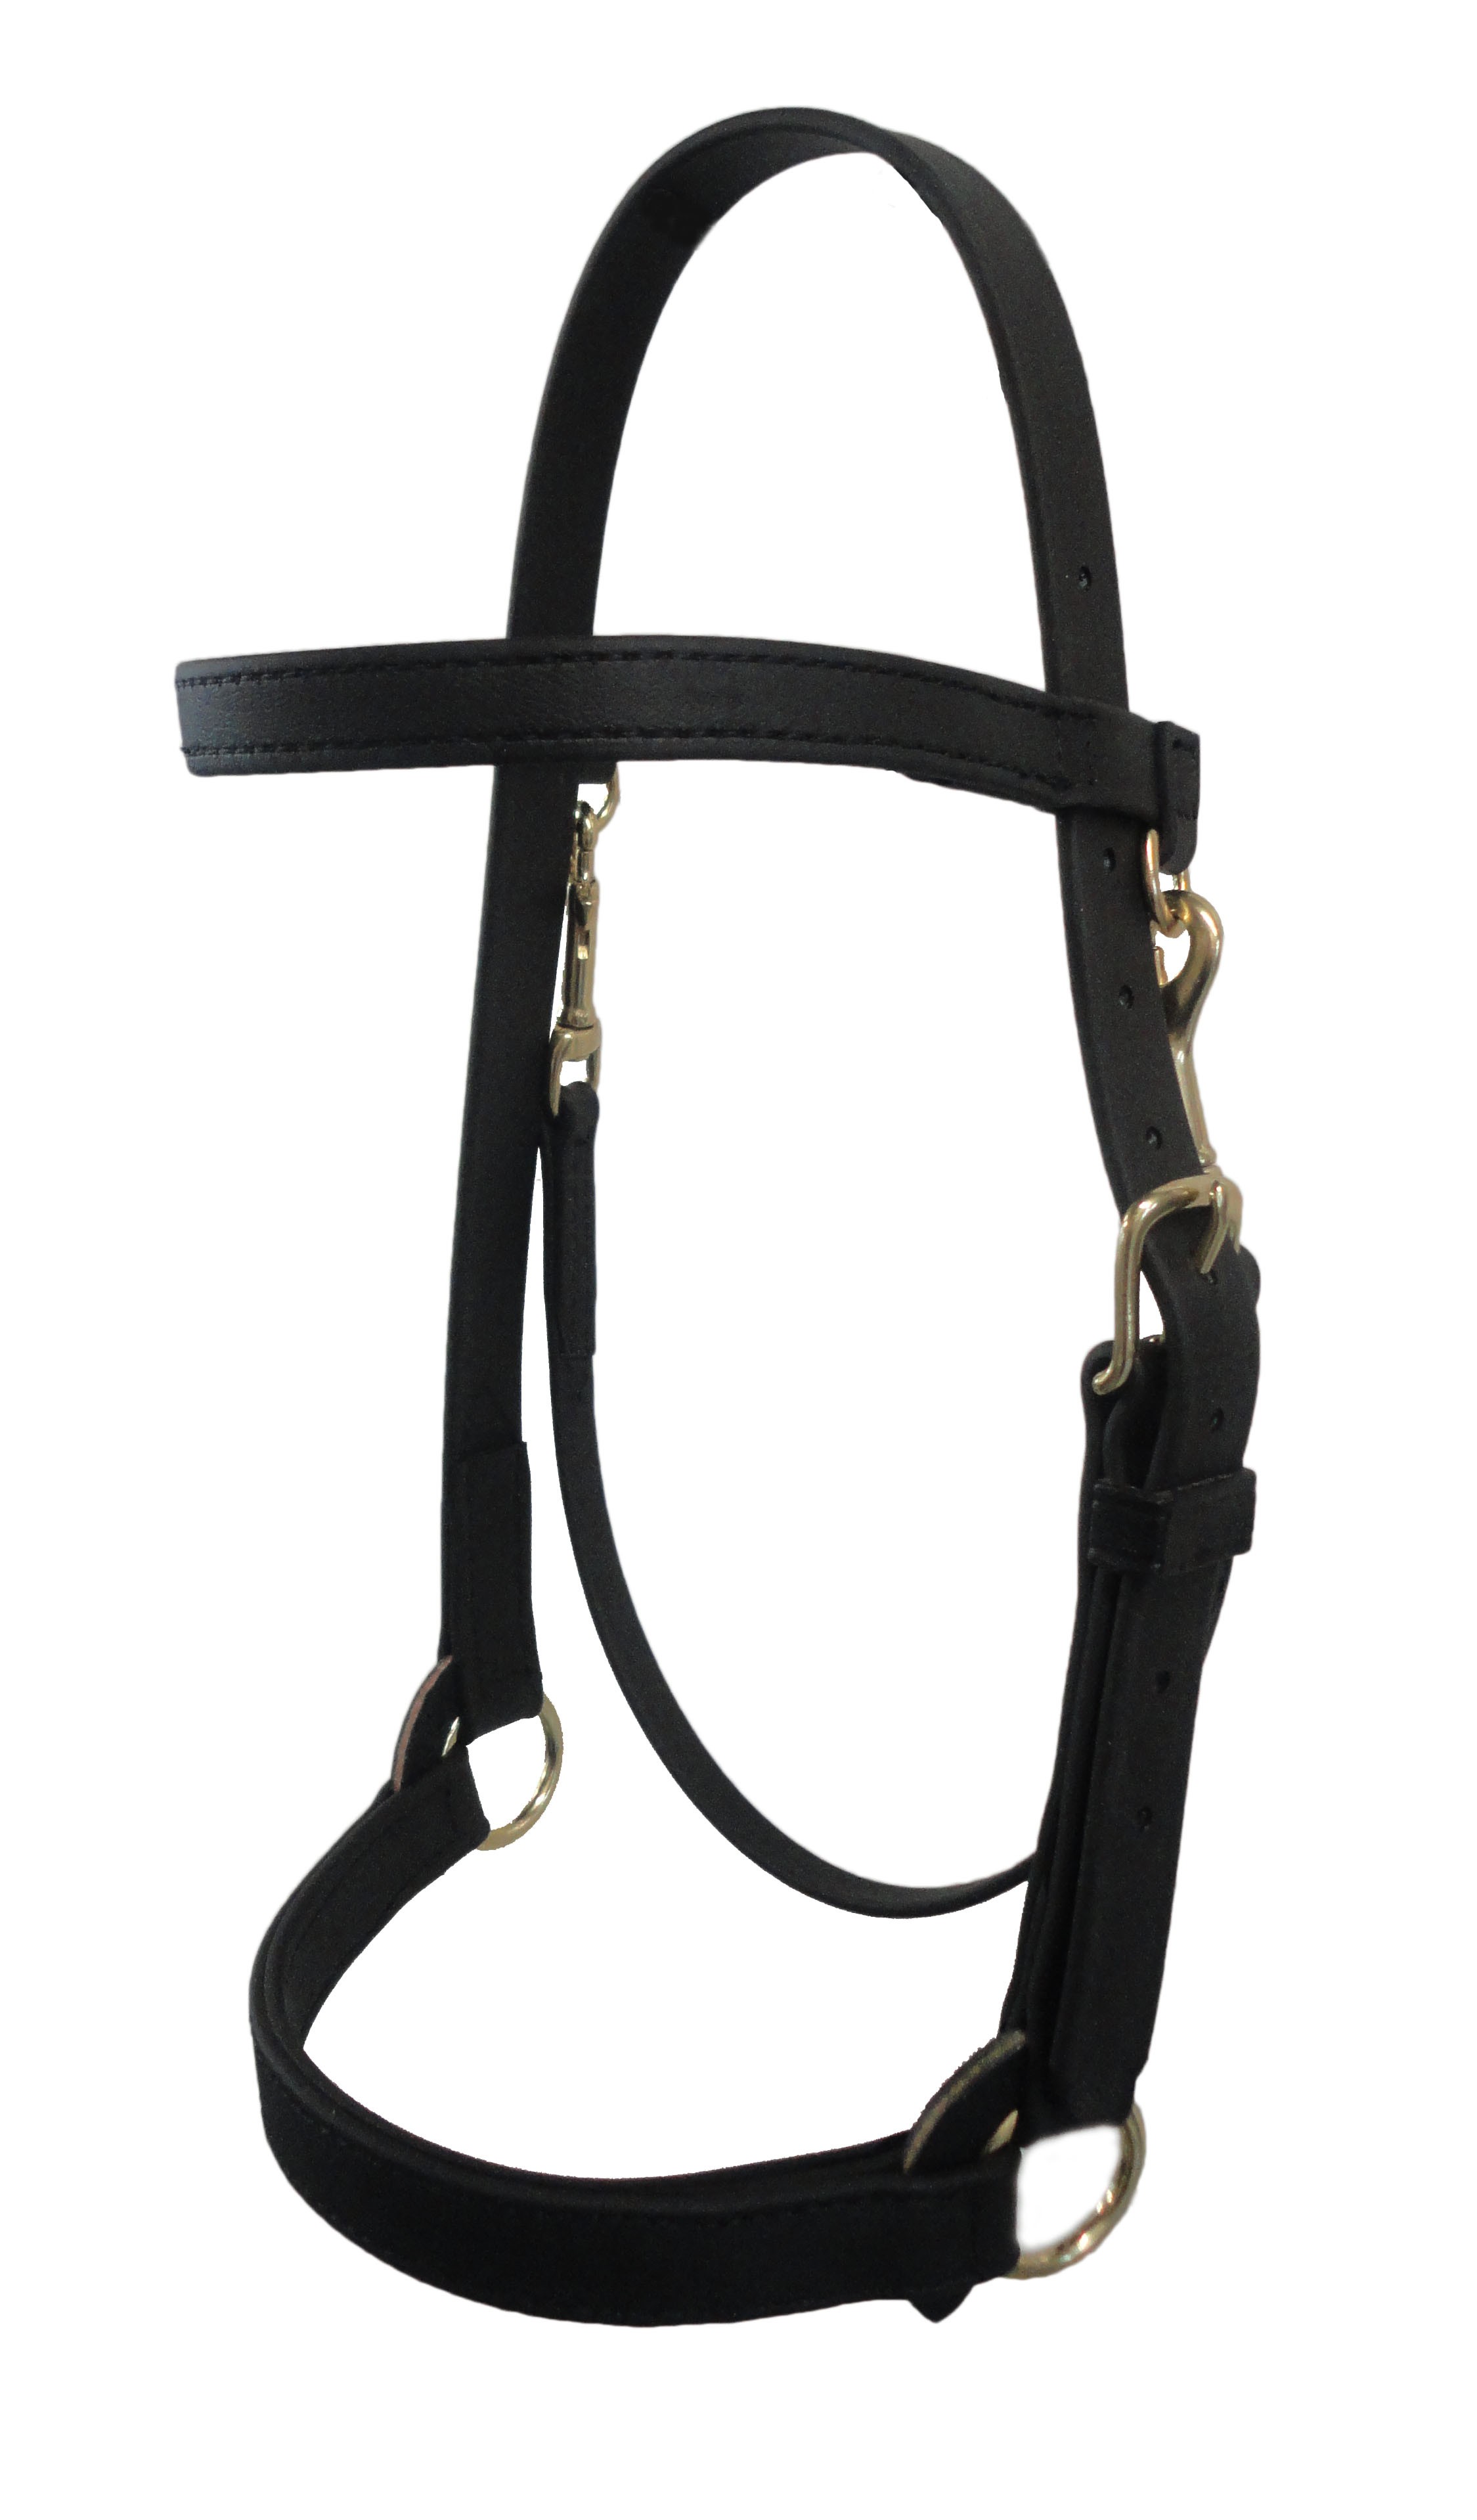 Heavy Duty 1" wide  Training Halter with Brow Band-Black